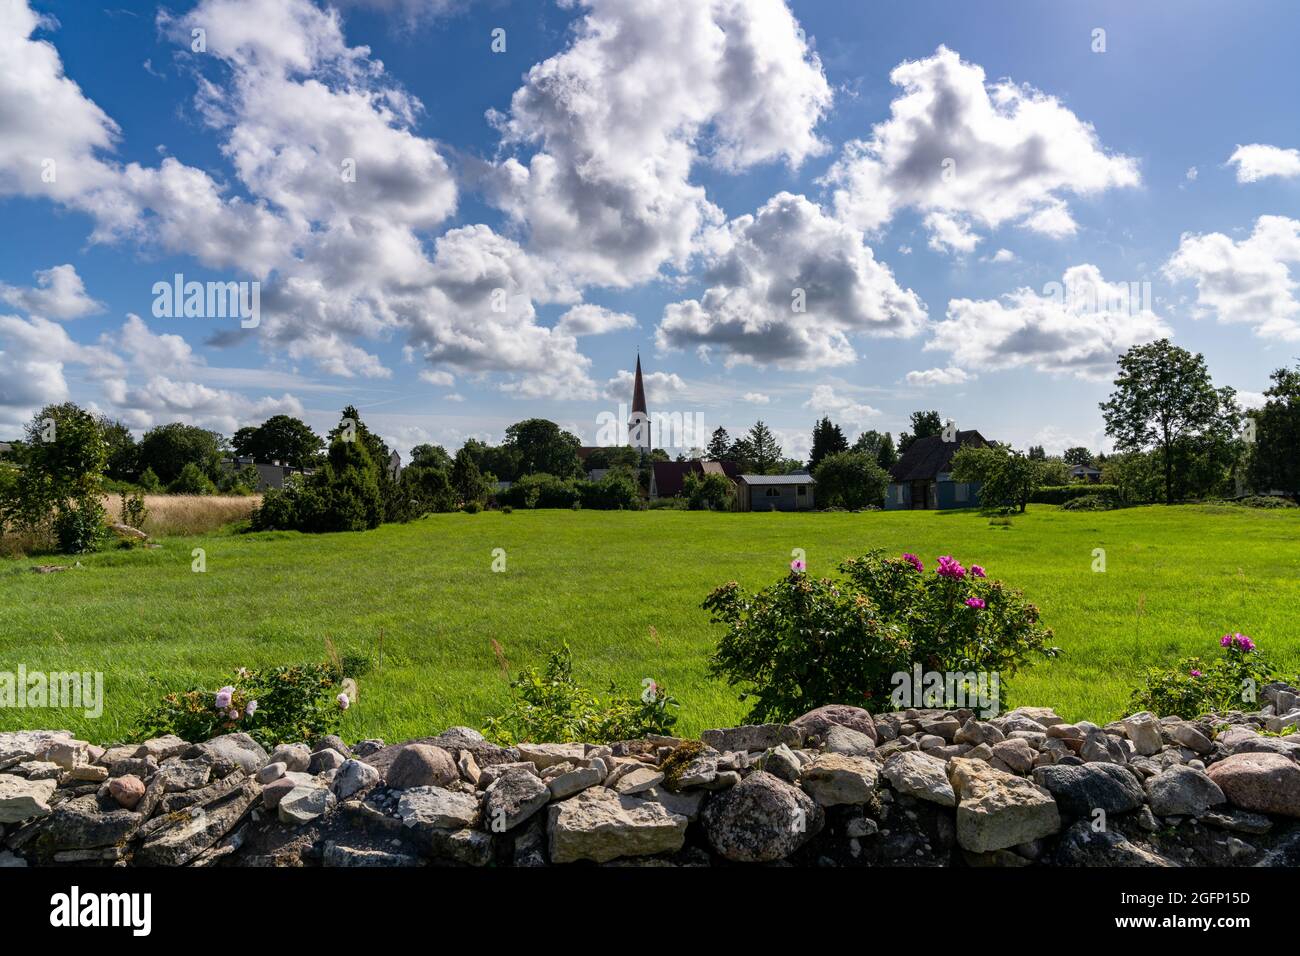 Kihelkonna, Estonia - 14 August, 2021: village of Kihelkonna with church steeple and a rock wall and field in the foreground Stock Photo